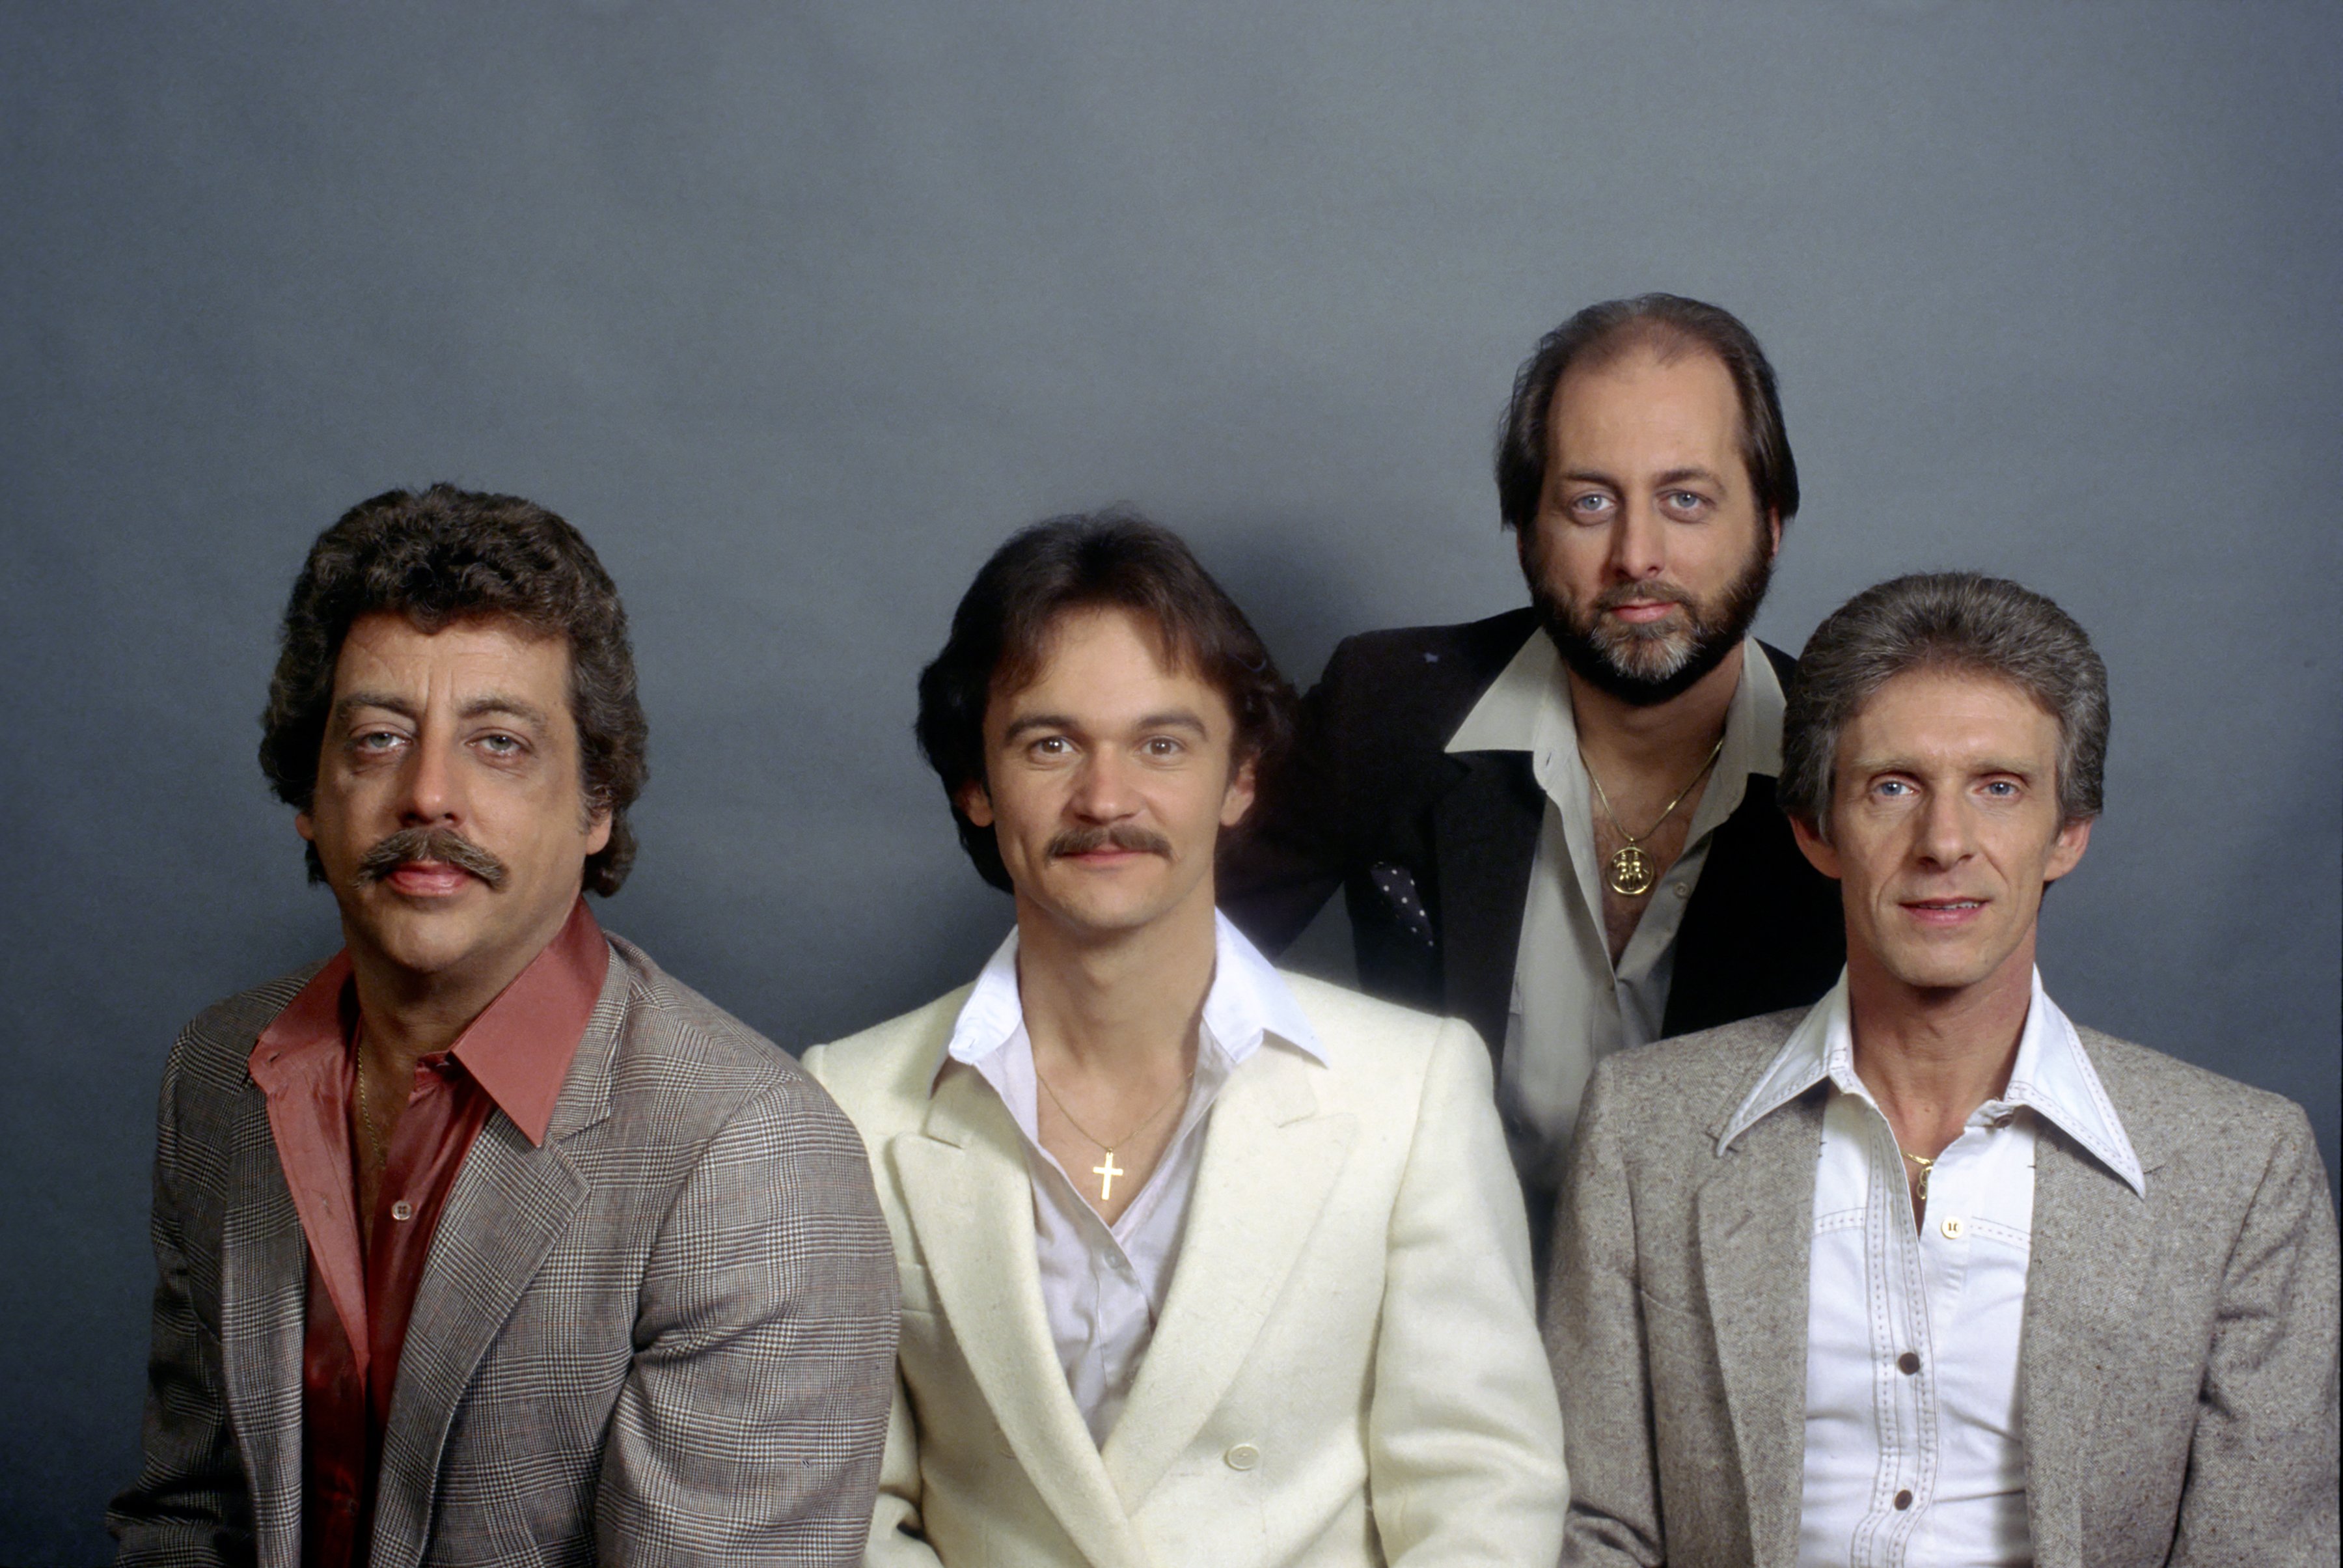 The Statler Brothers members: Harold Reid, Jimmy Fortune, Don Reid and Phil Balsley posing for a photo in 1970 | Photo: Getty Images